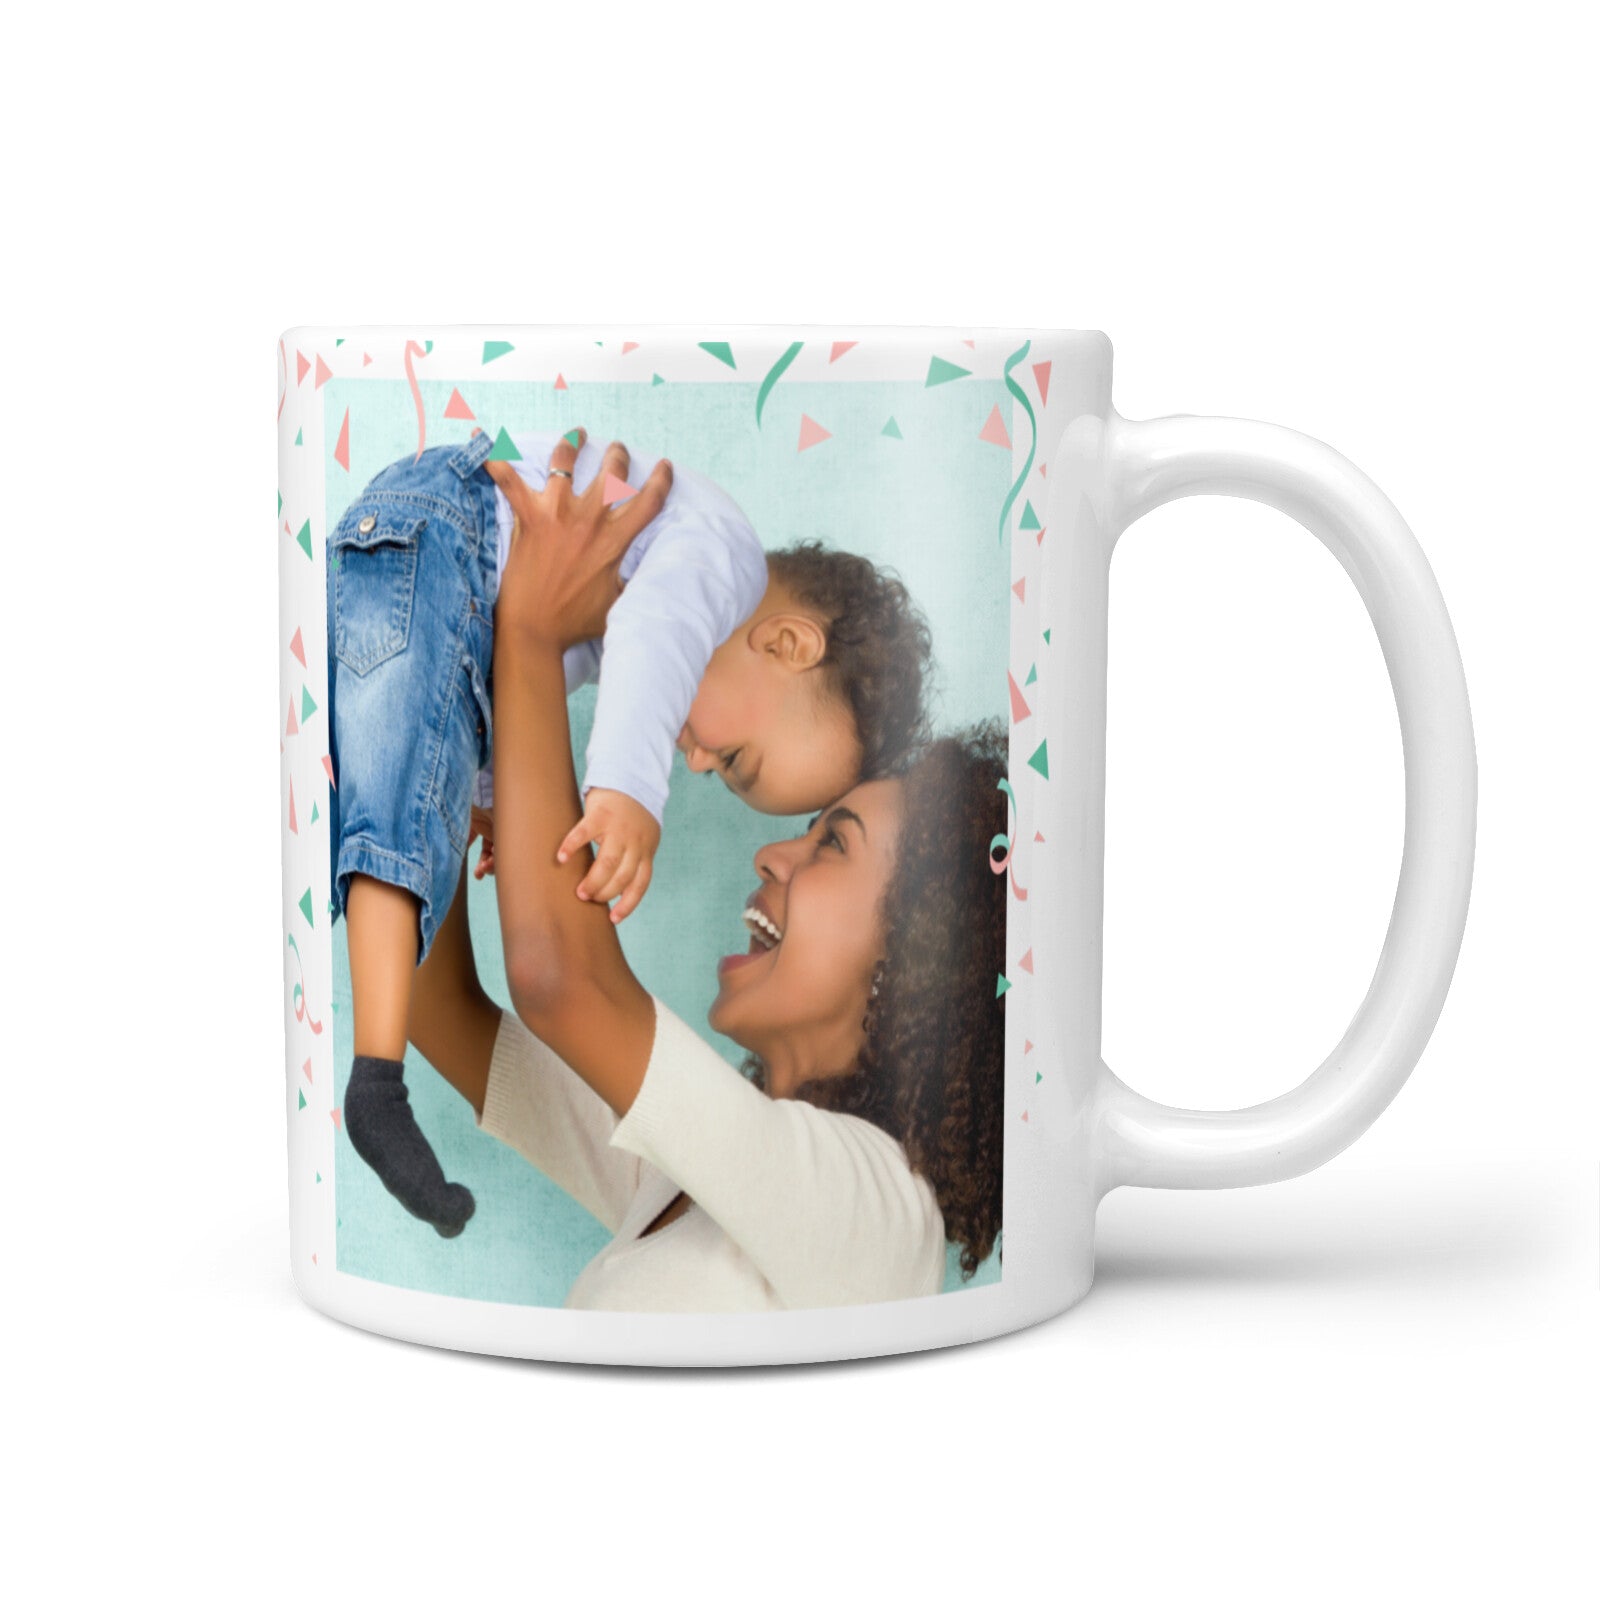 Personalized Family Mug - Our First Mother's Day Together